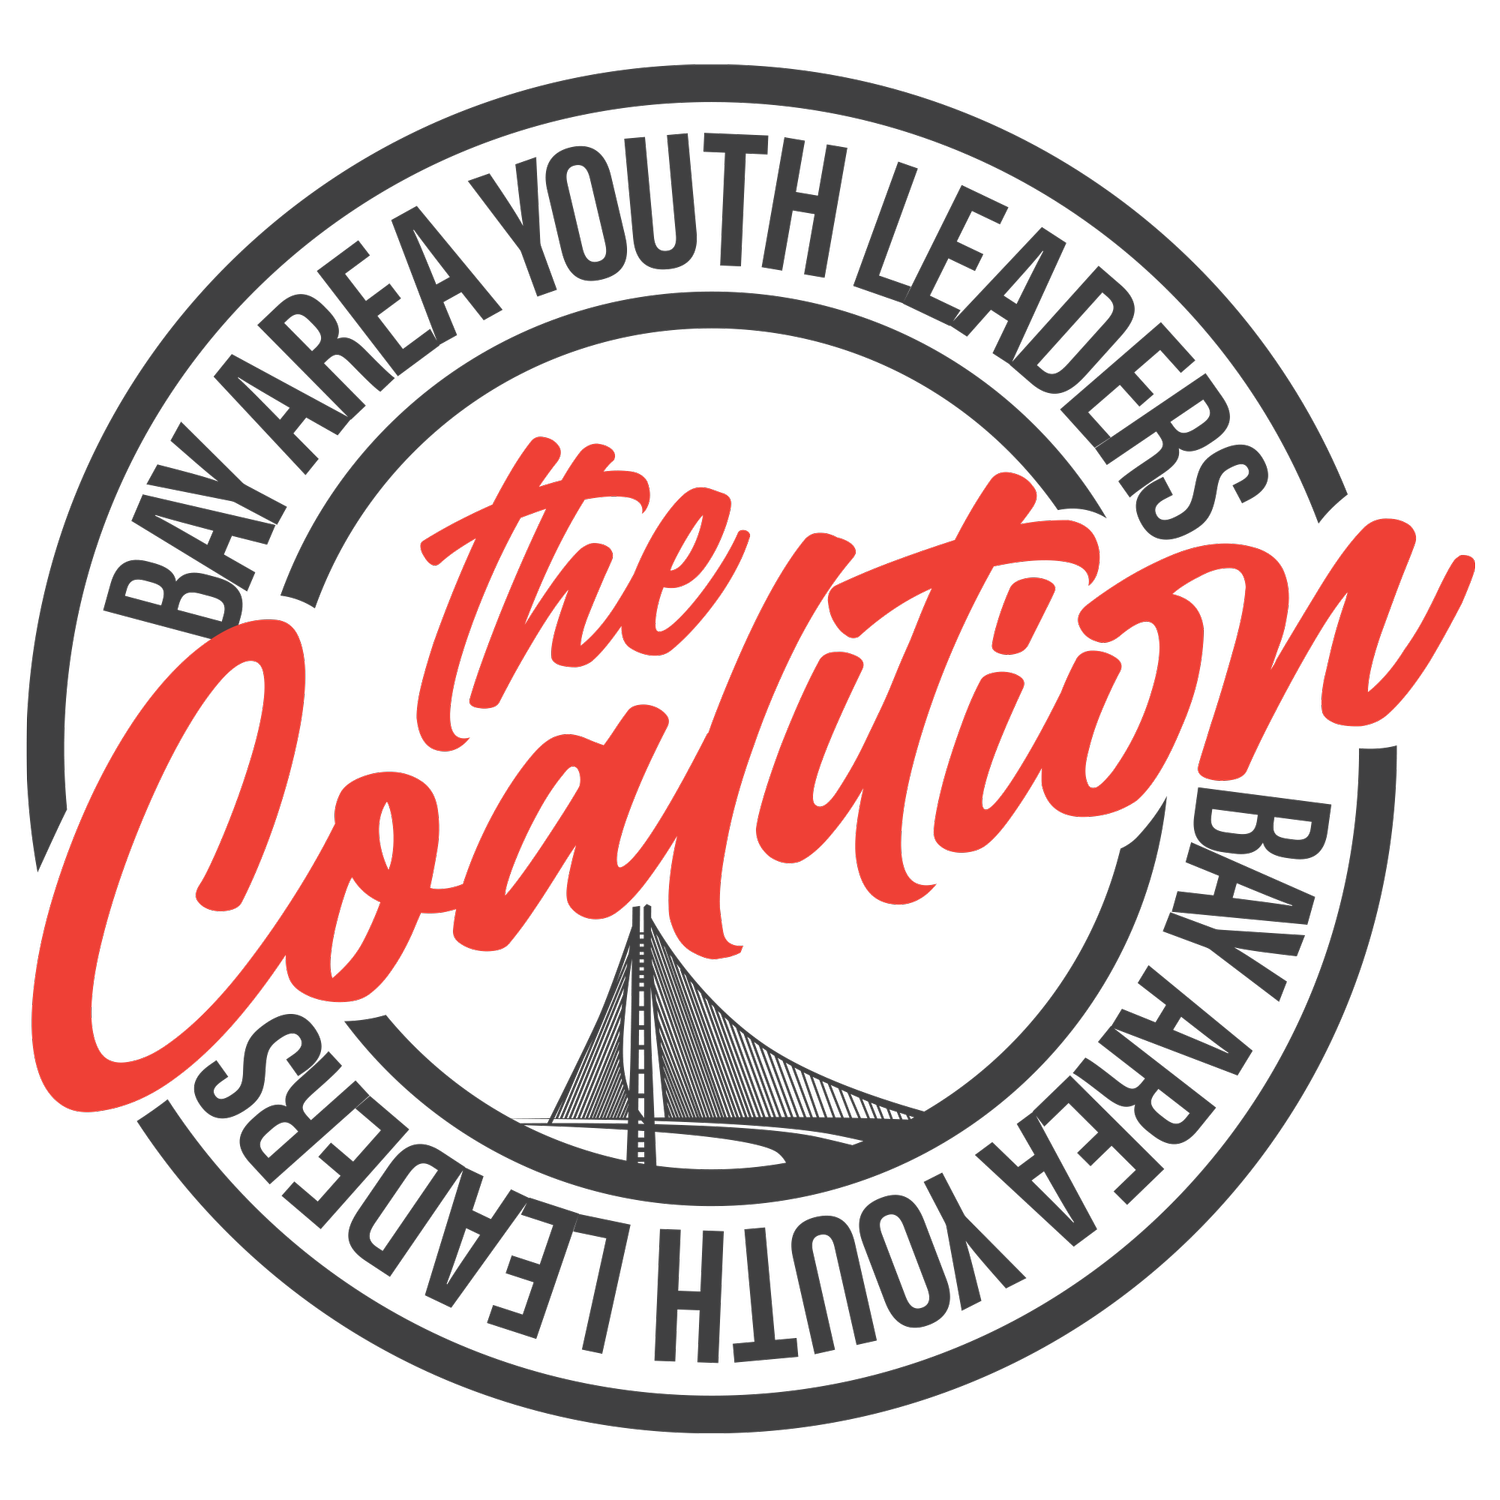 Bay Area Youth Leaders Coalition